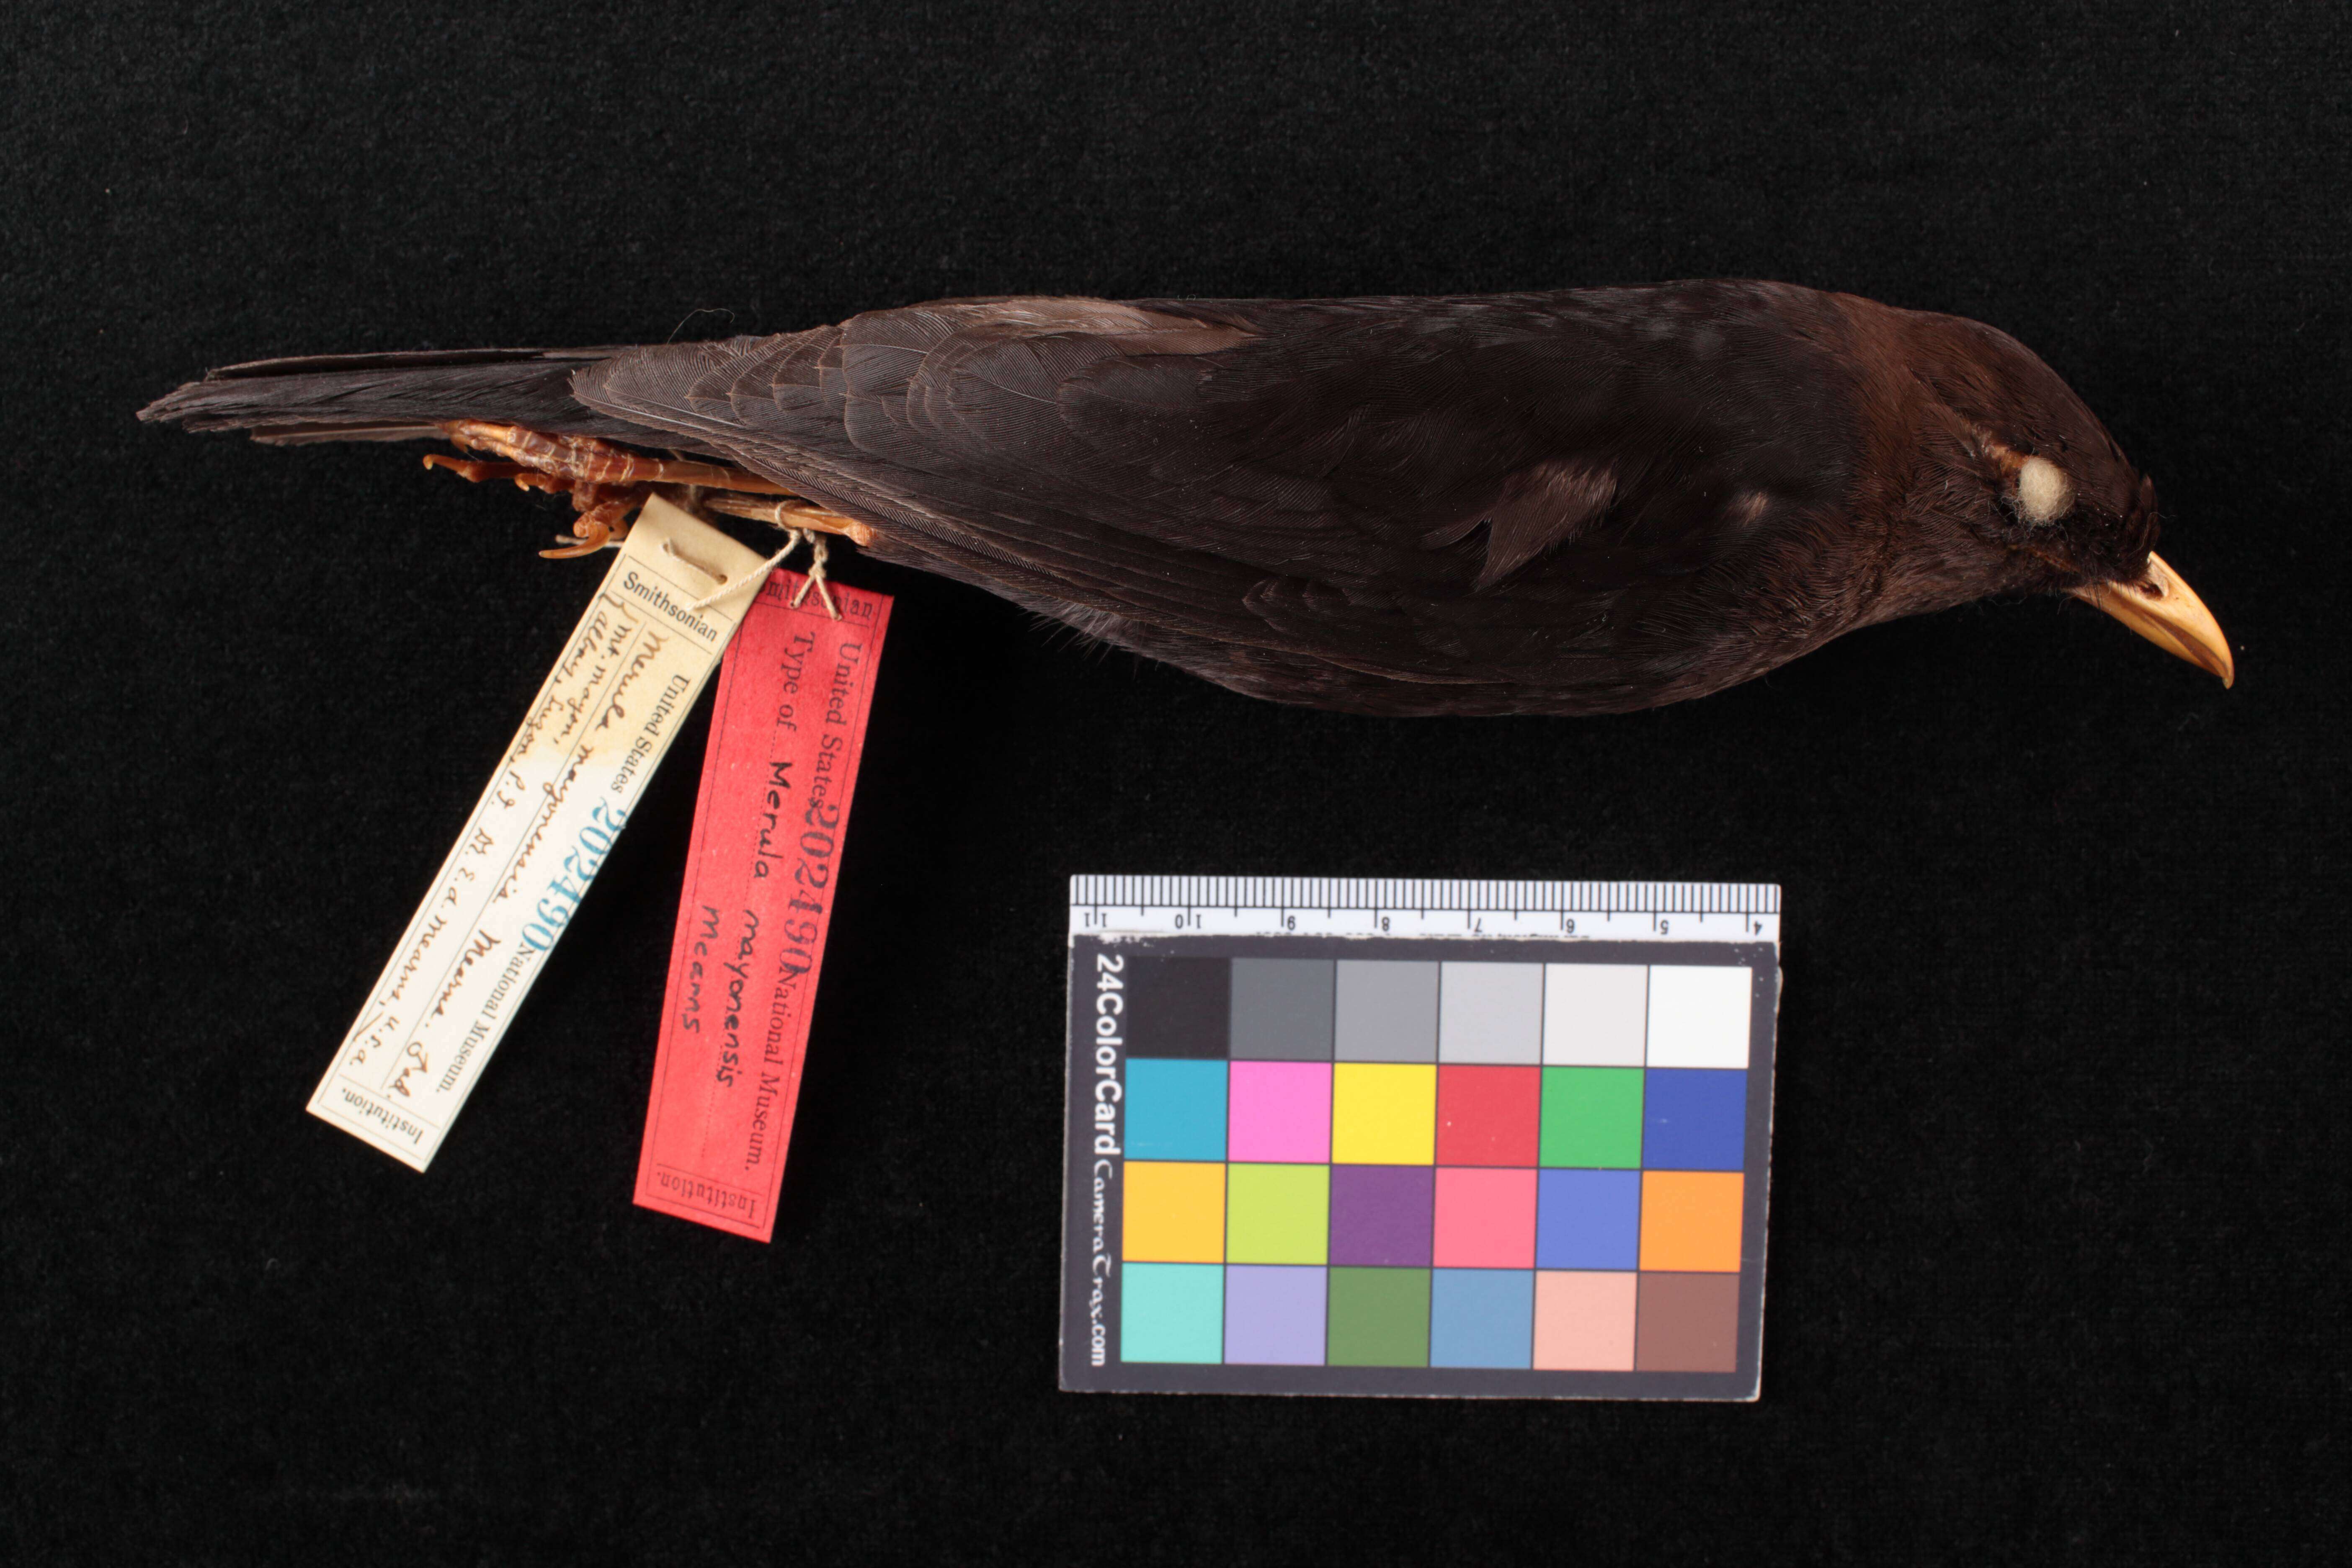 Image of Turdus poliocephalus mayonensis (Mearns 1907)